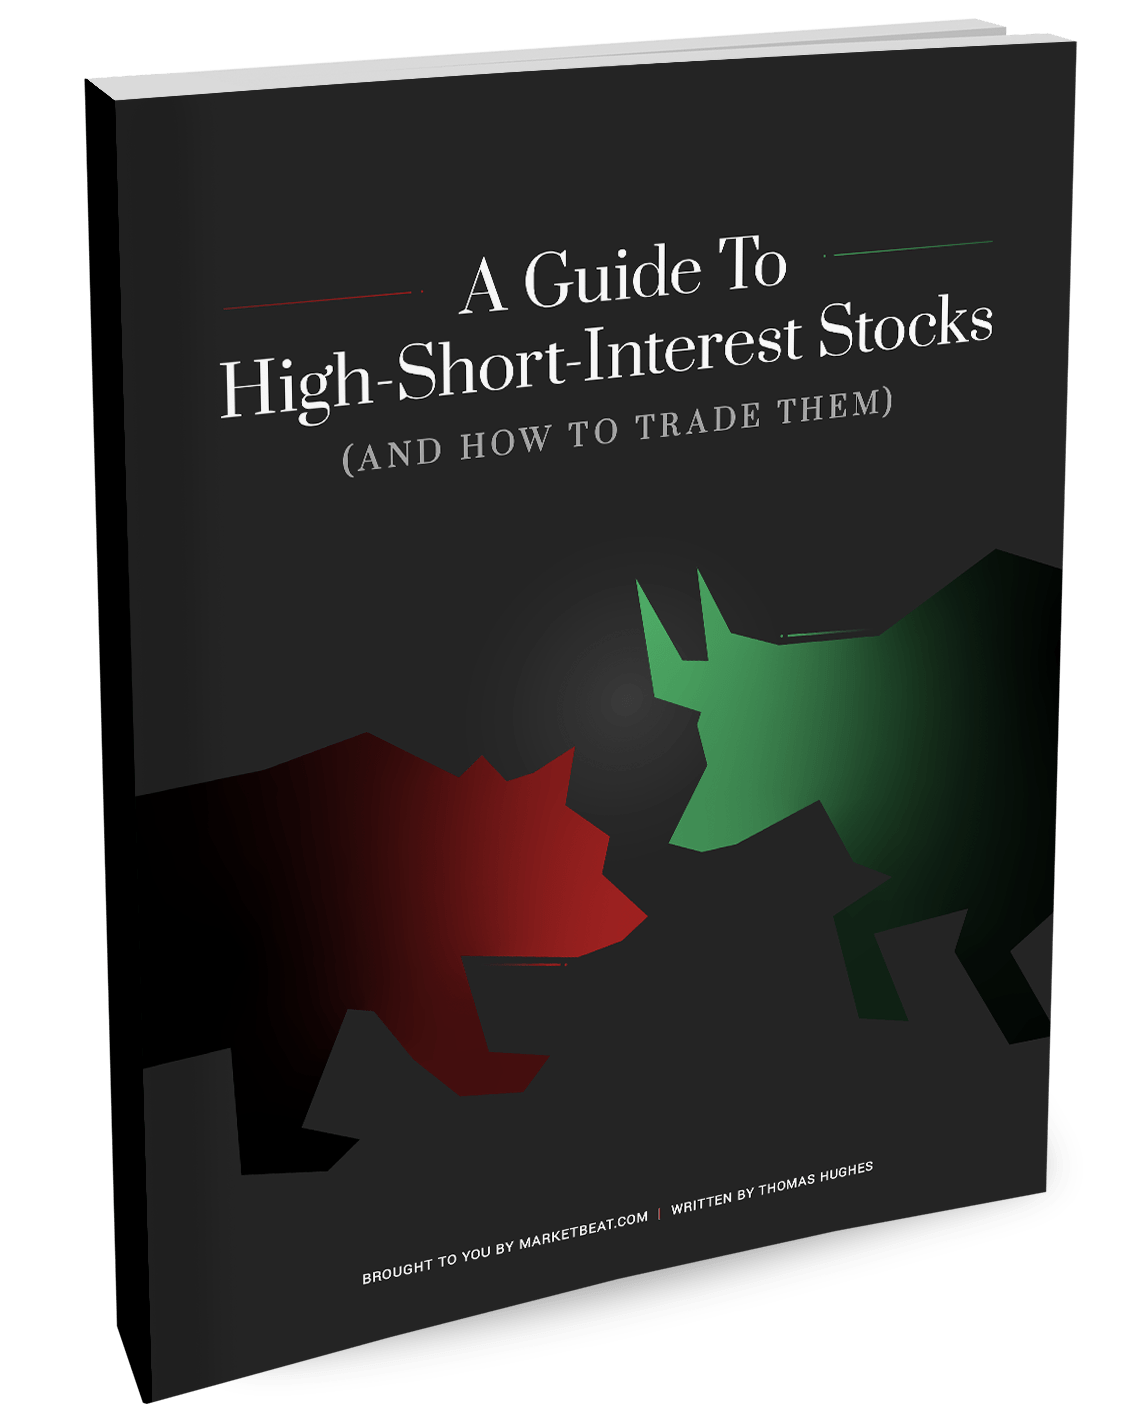 A Guide To High-Short-Interest Stocks Coverage